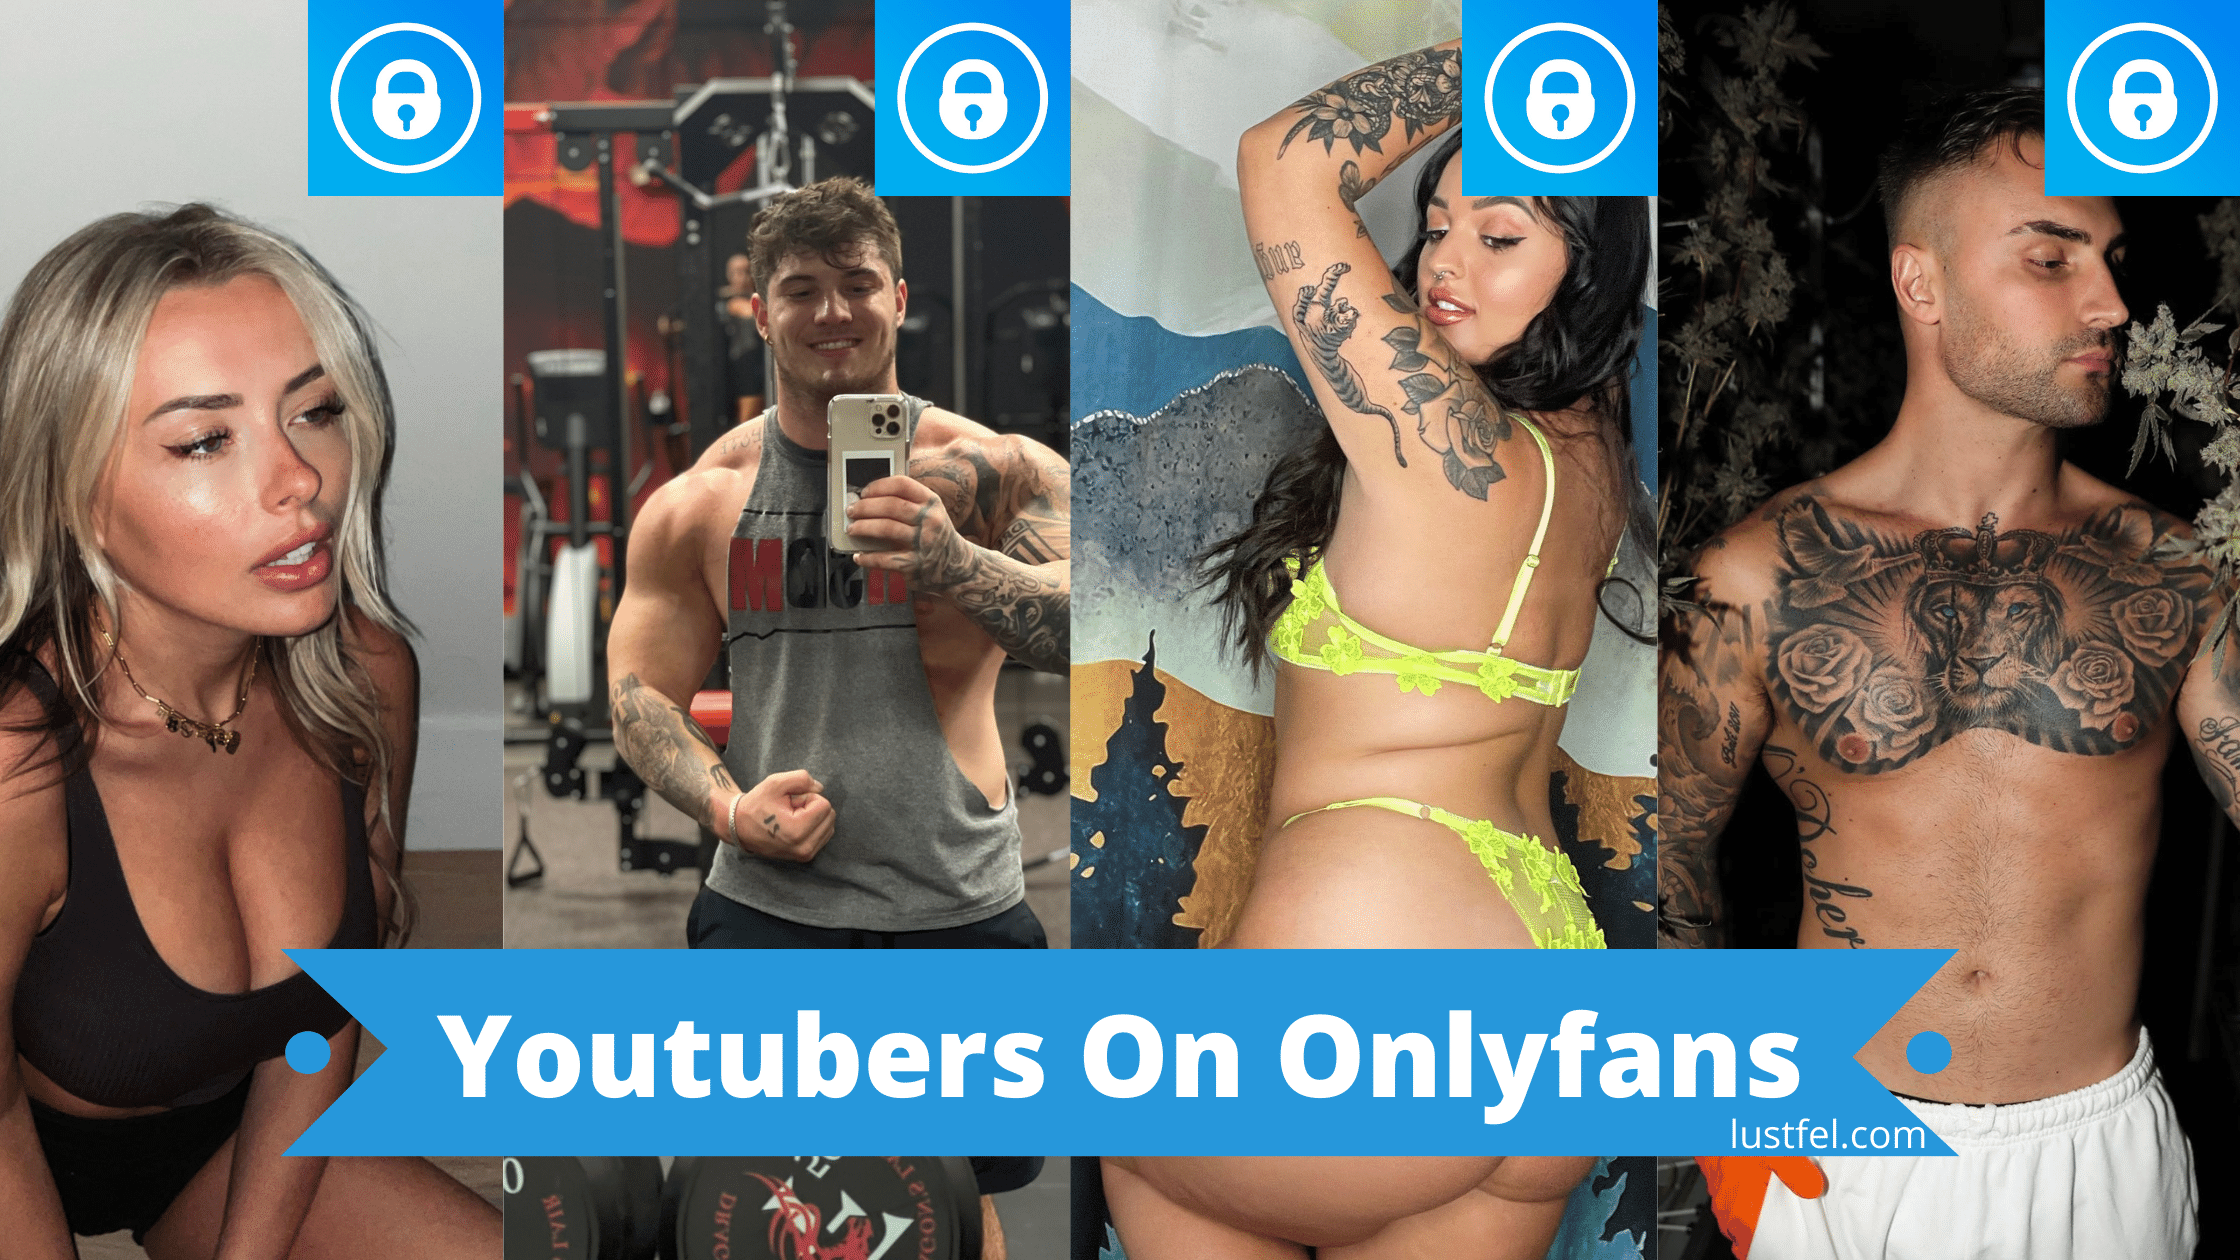 Youtube stars who did porn